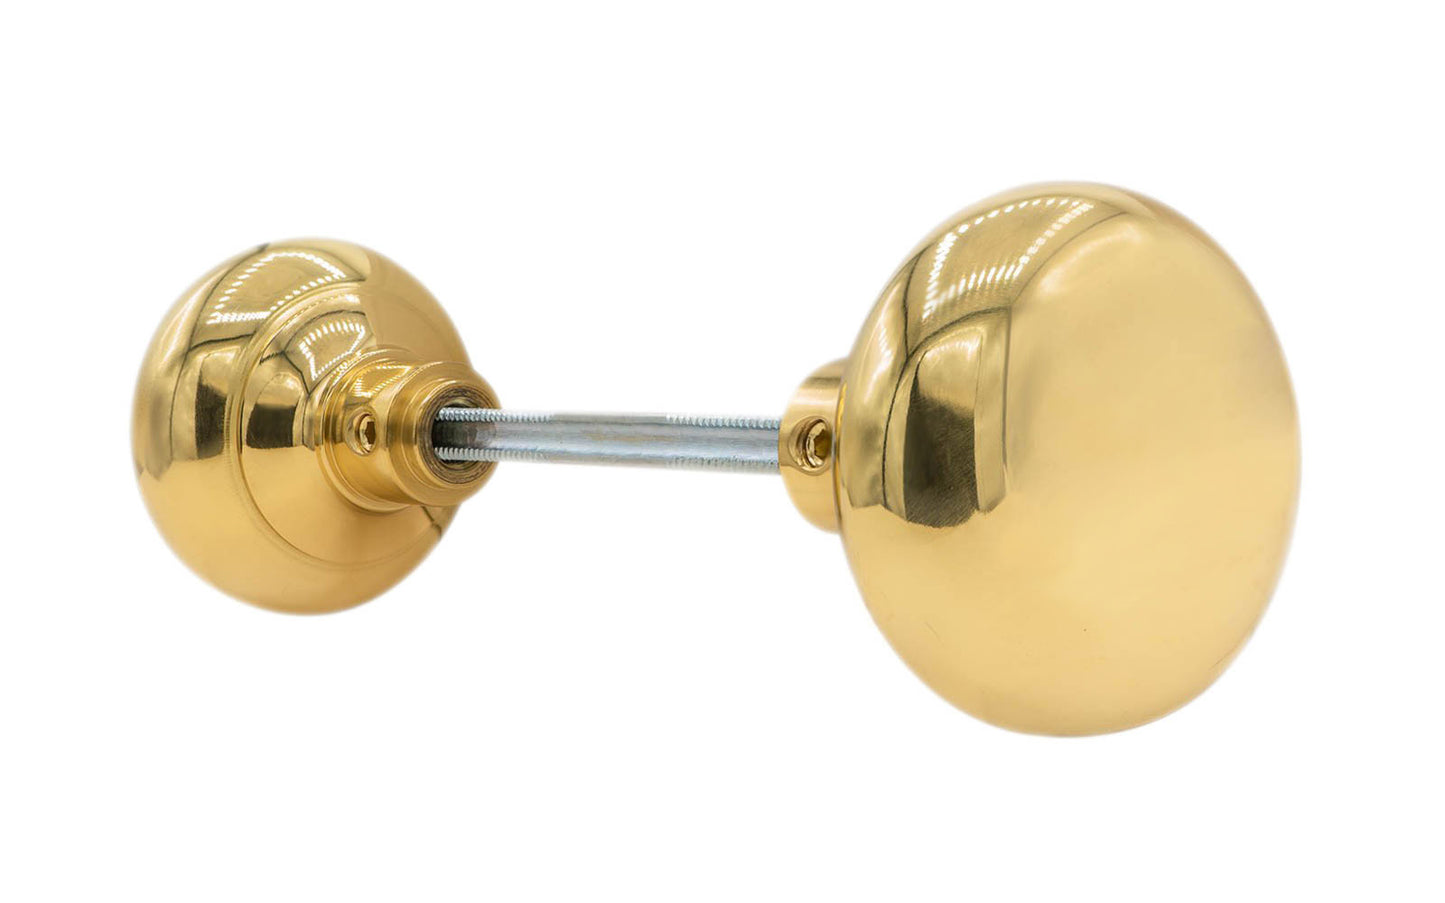 Pair of Traditional & Classic Brass Smooth Design Doorknobs with spindle. Quality hollow core wrought brass doorknobs with an attractive circle-ring design. Reproduction Brass Door Knobs. Traditional Brass Knobs with Spindle. Lacquered Brass Finish.